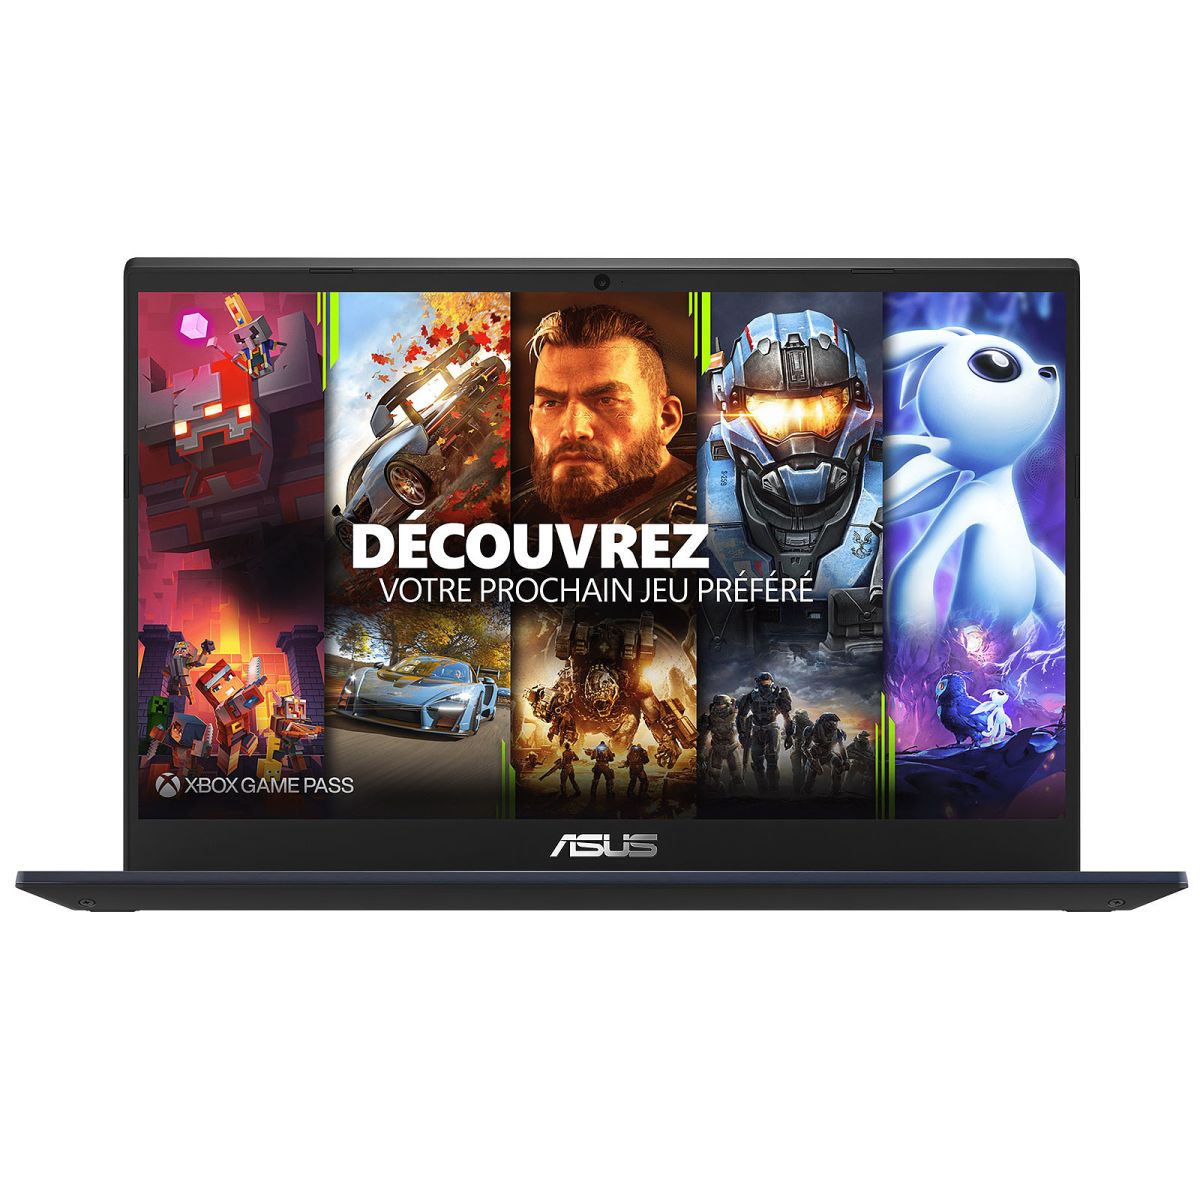 Asus F571G Intel Core i5-9300h 2.4Ghz 8 Go SSD 512 Go